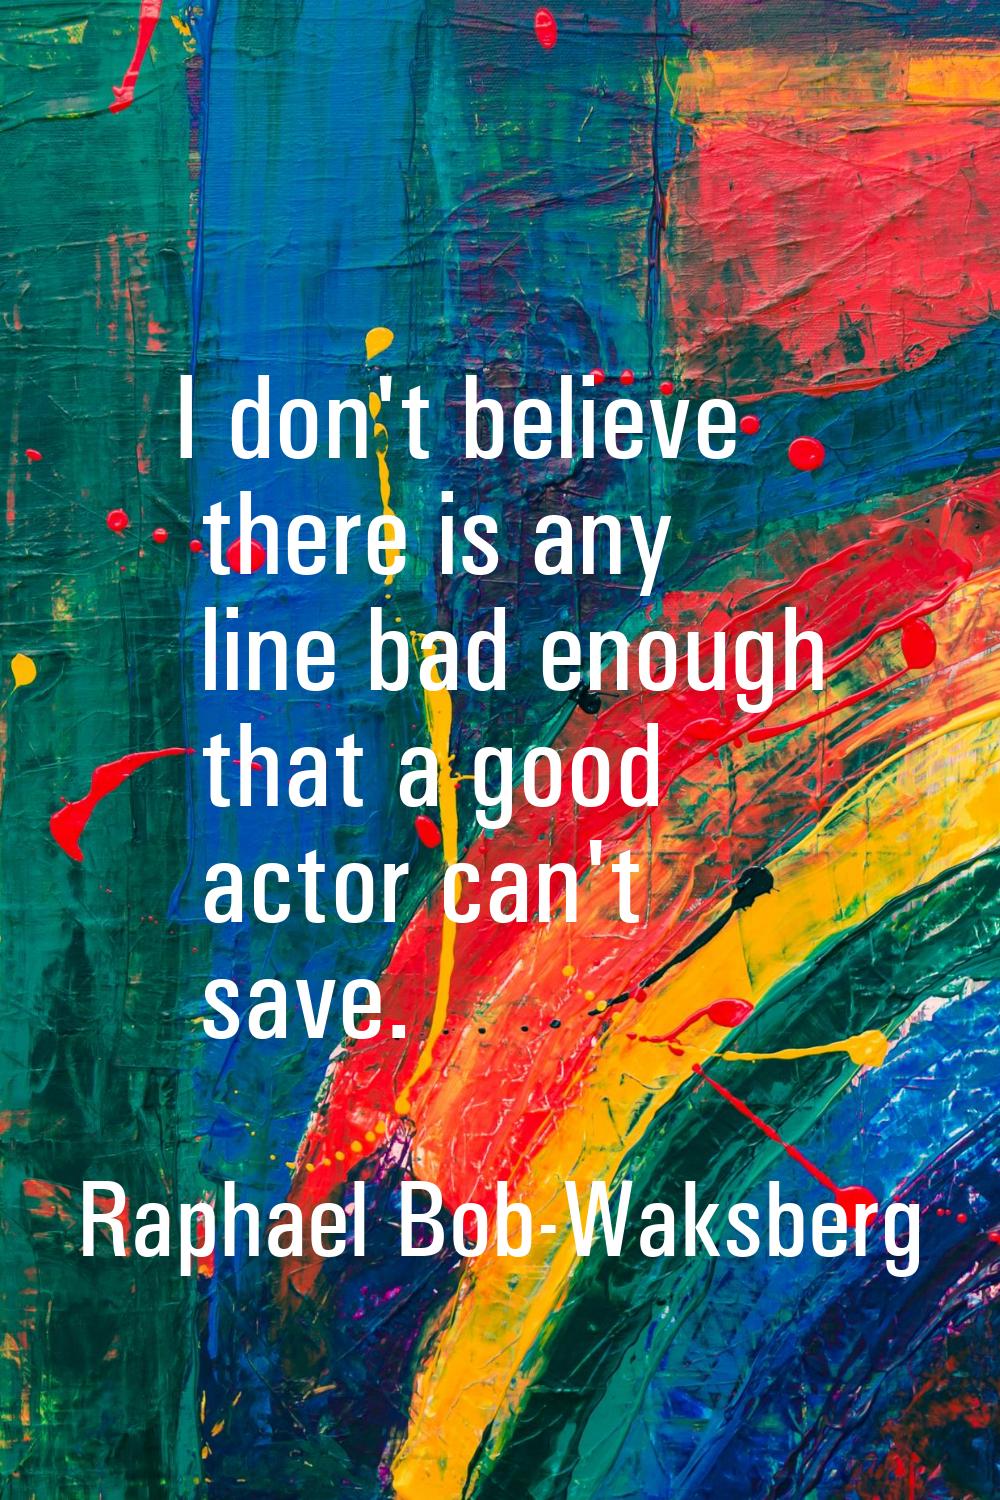 I don't believe there is any line bad enough that a good actor can't save.